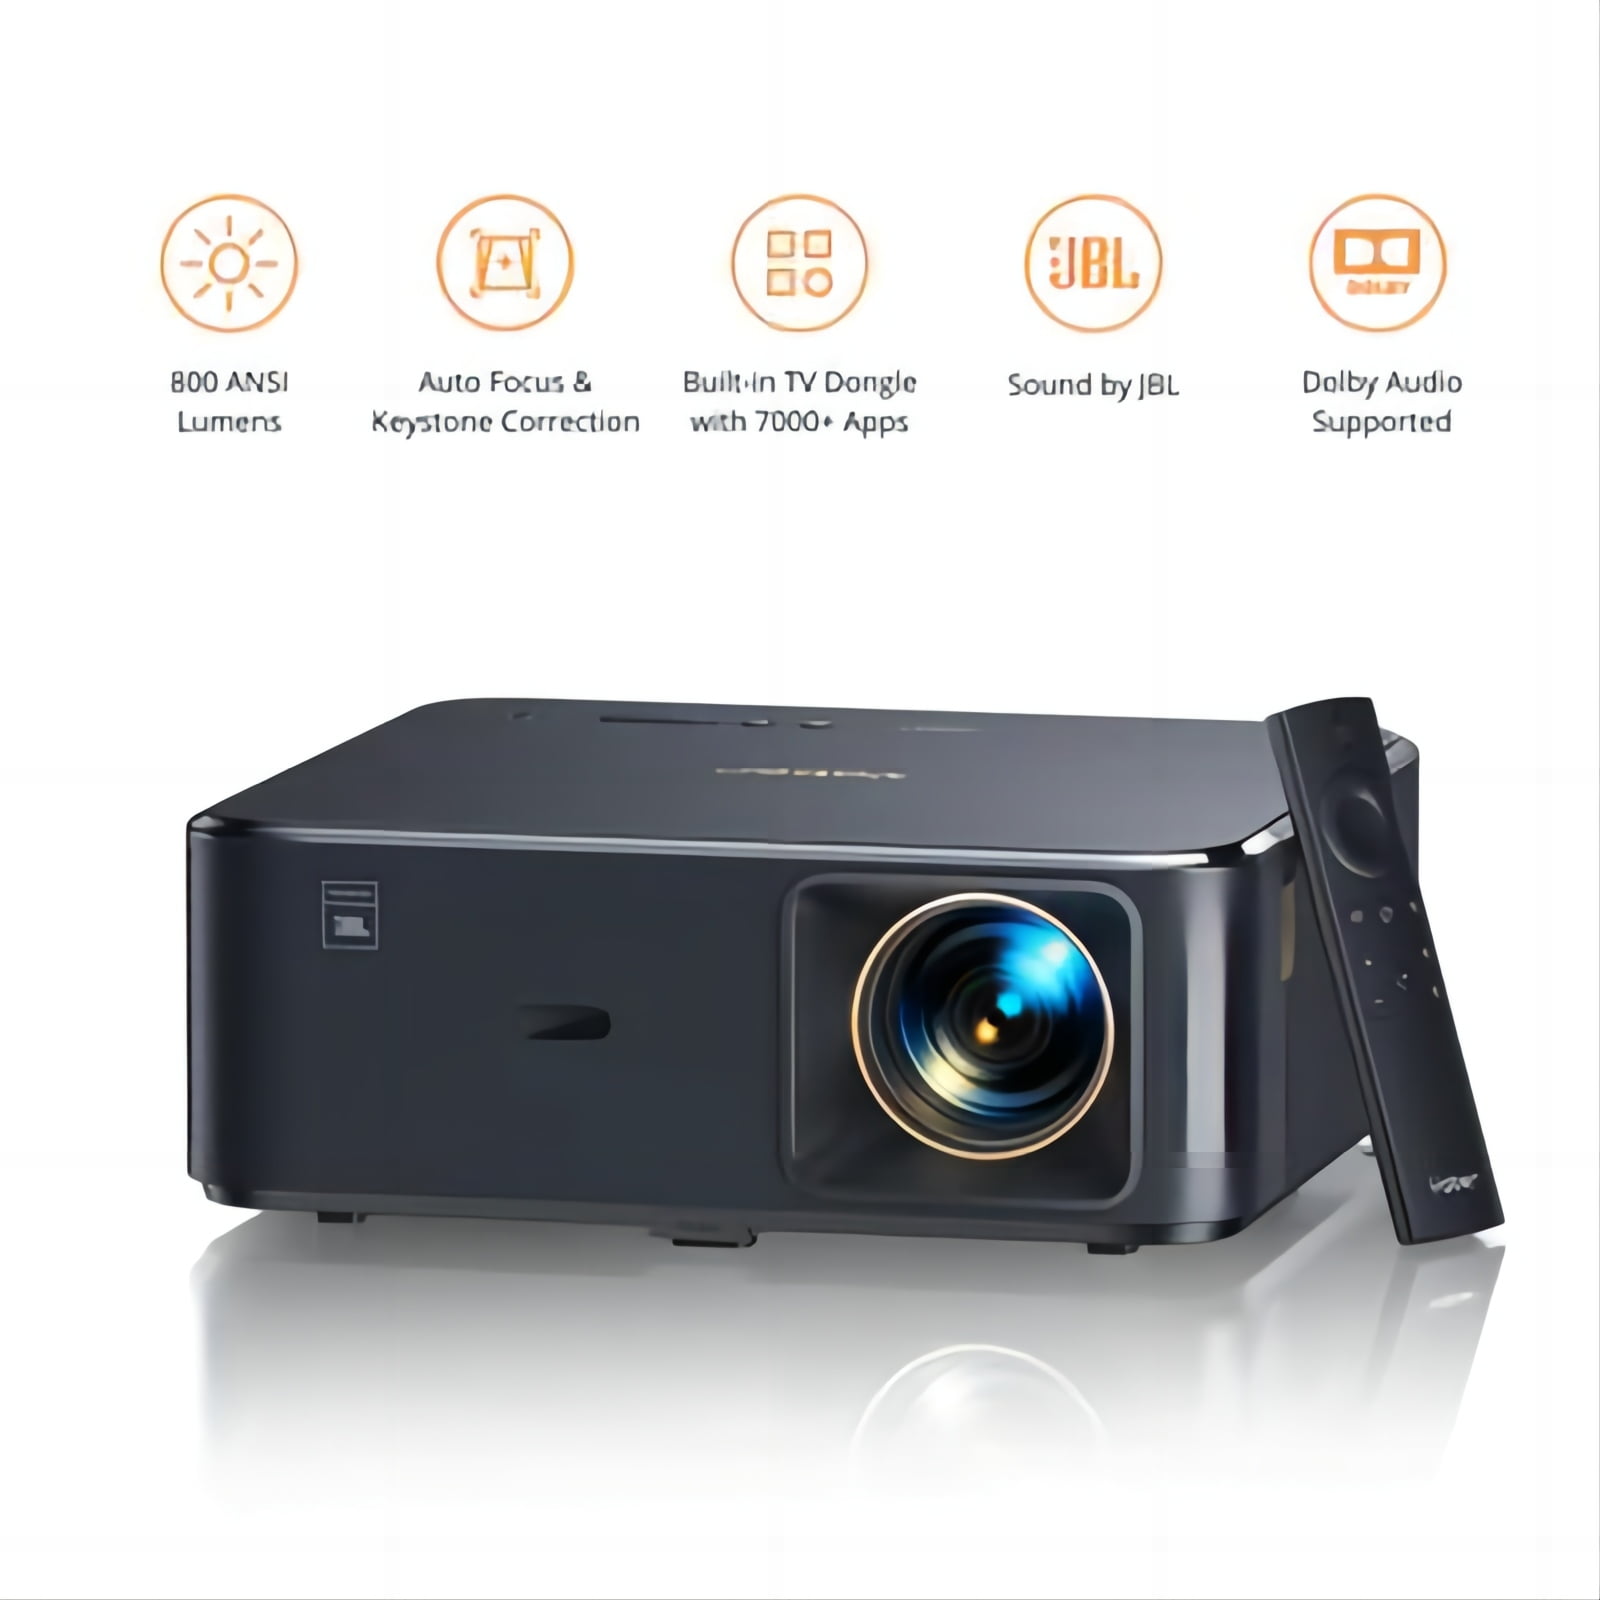 Yaber K2S 4K Projector with JBL speakers and Dolby Audio support unveiled  in India - Gizmochina